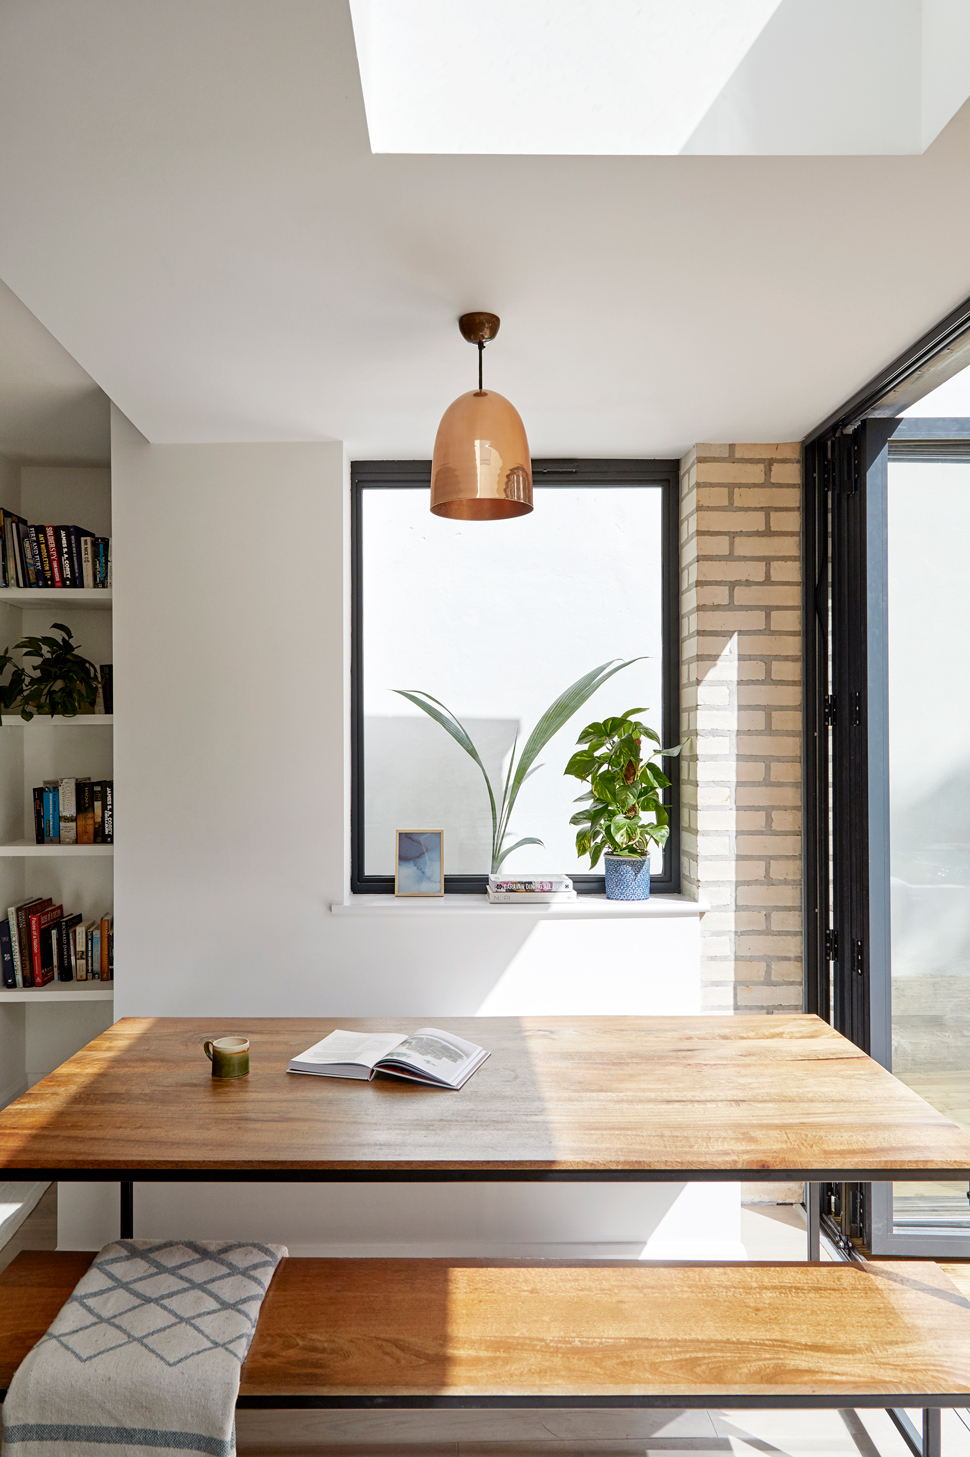 </p> <p>Find your ideal home design pro on designfor-me.com - get matched and see who's interested in your home project. Click image to see more inspiration from our design pros</p> <p>Design by Jonty, architect from Wandsworth, London</p> <p>#architecture #homedesign #modernhomes #homeinspiration #skylights #rooflights </p> <p>